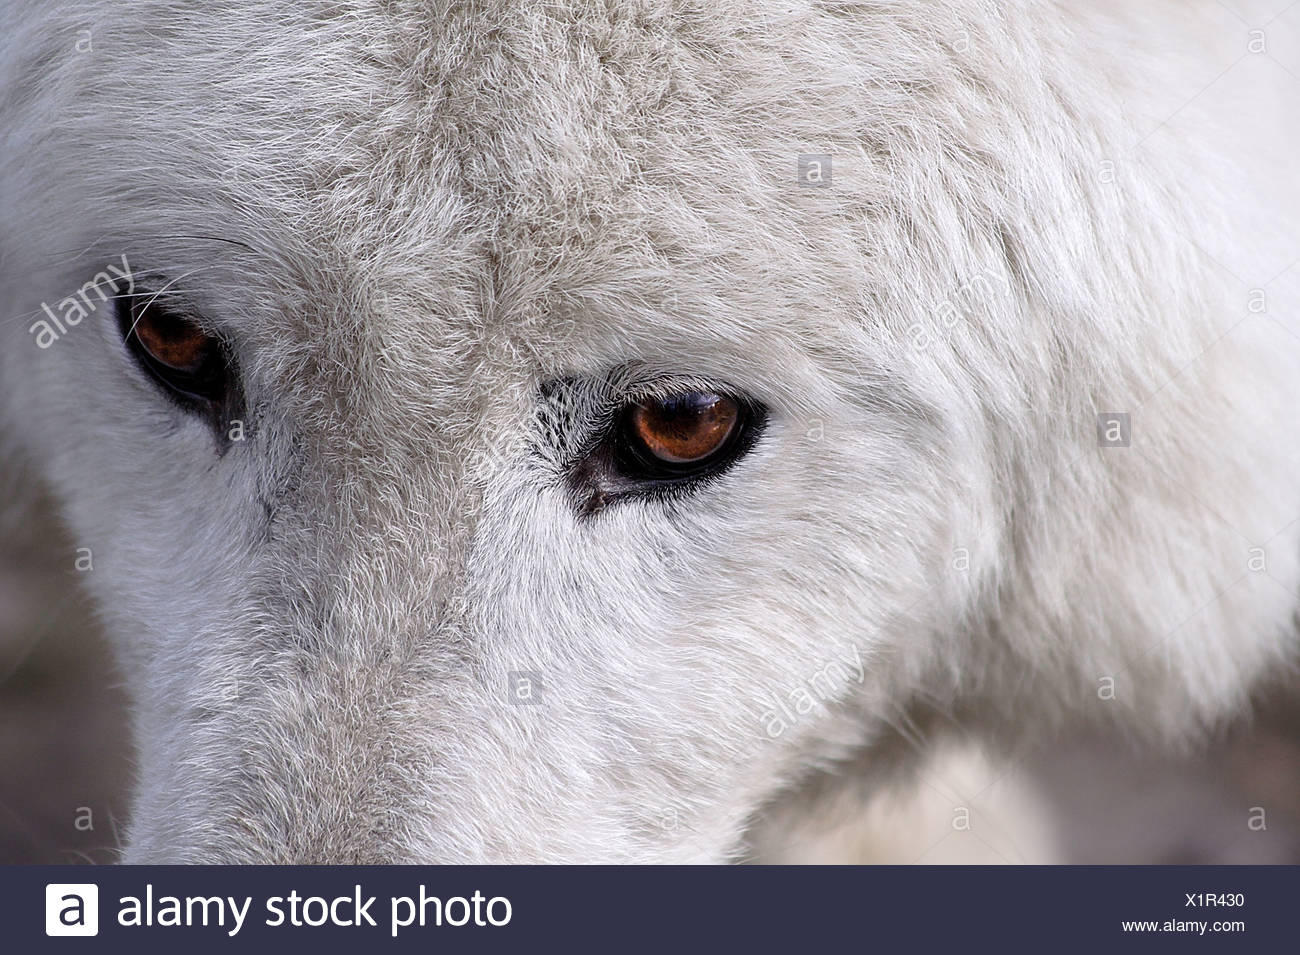 white-wolf-with-brown-eyes-X1R430.jpg